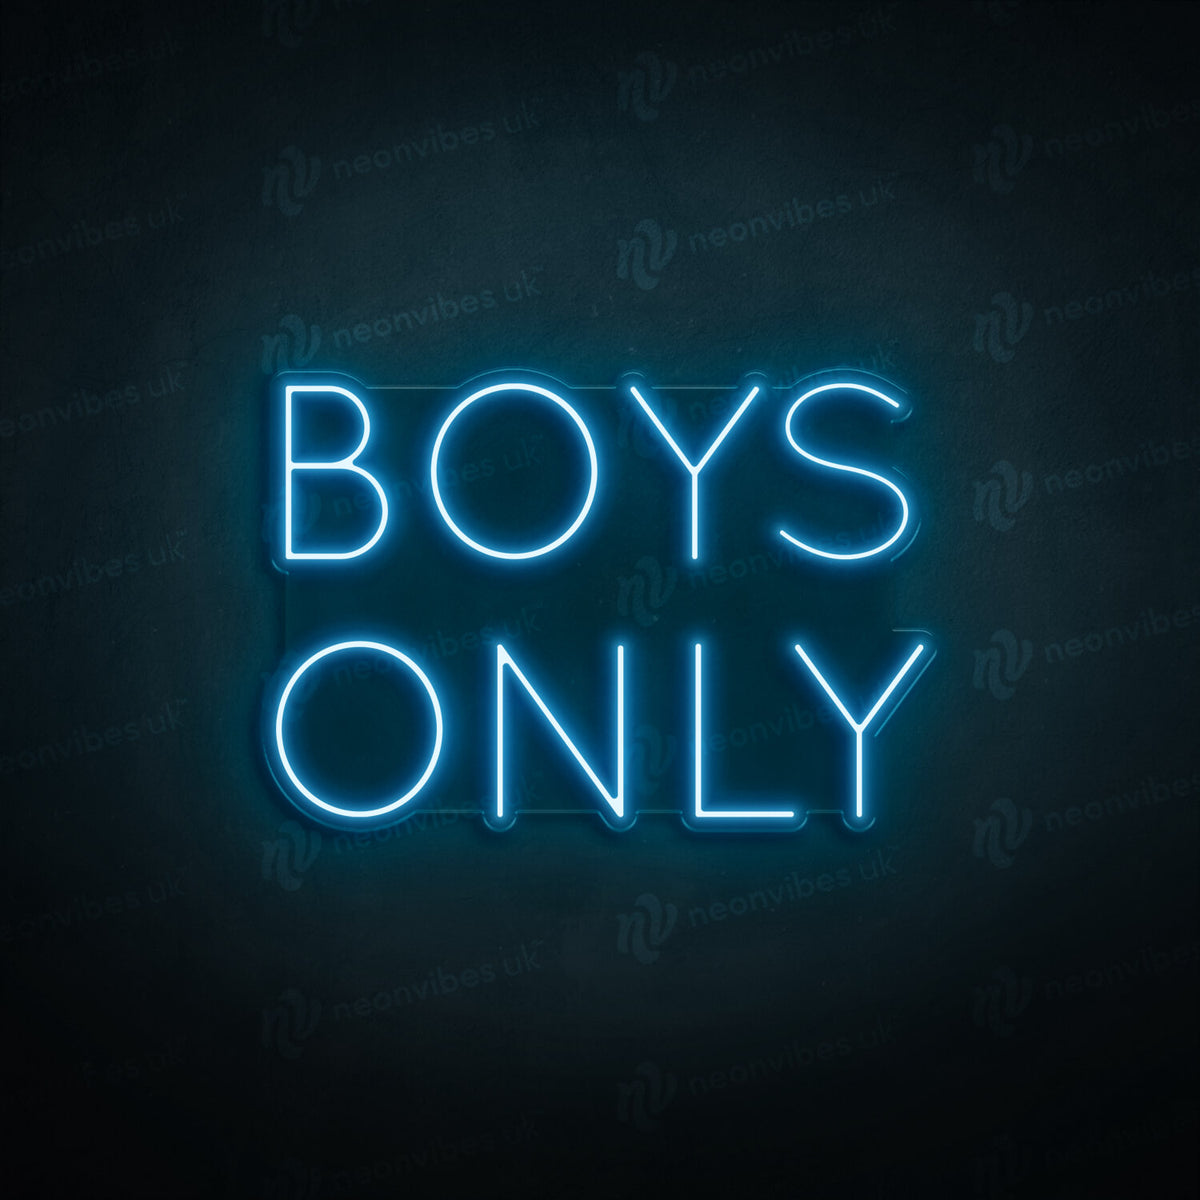 Boys Only neon sign